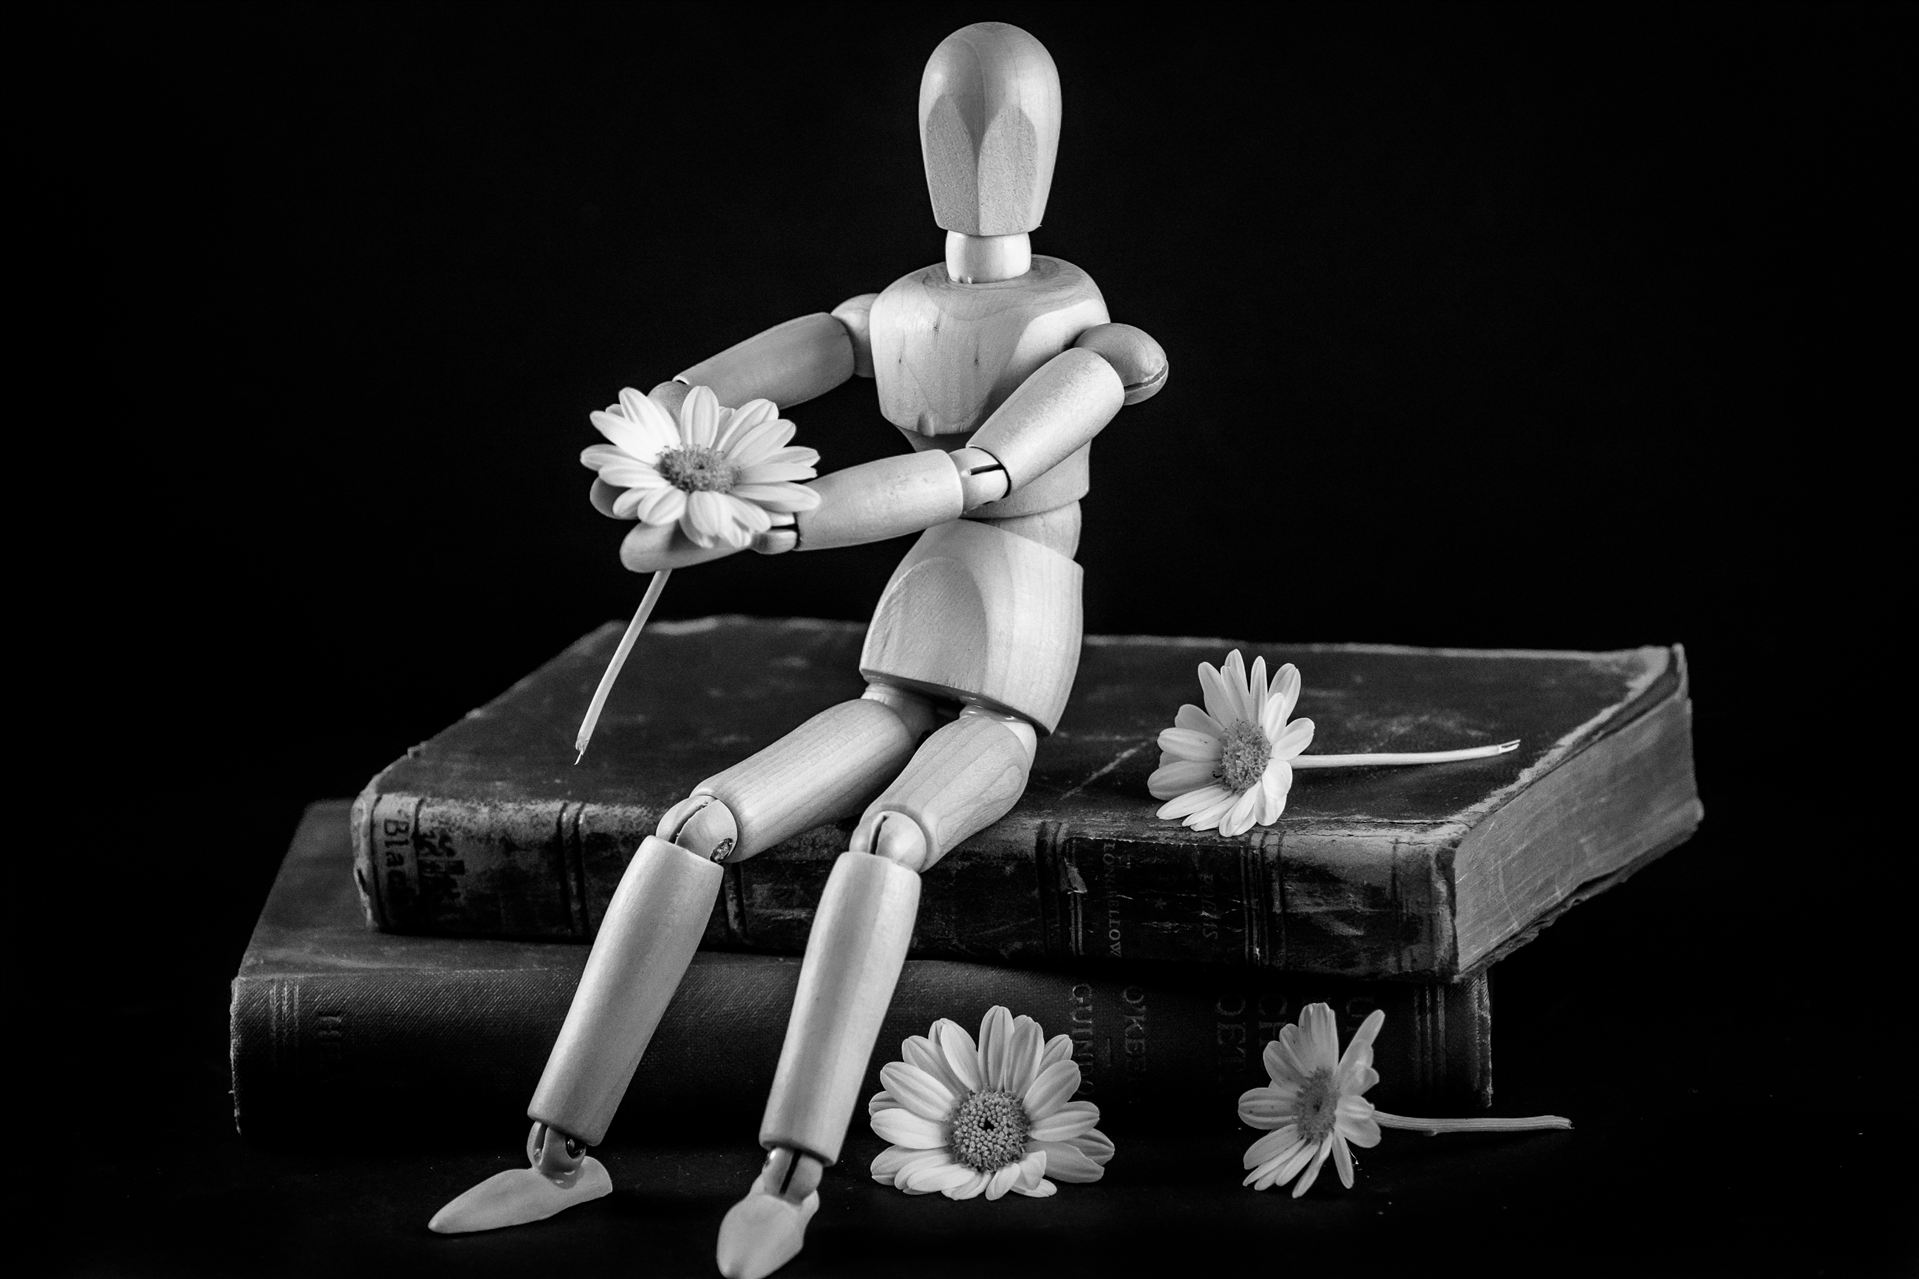 Artificial Apology.jpg It takes more than a flower to say "I'm sorry" by Sarah Williams